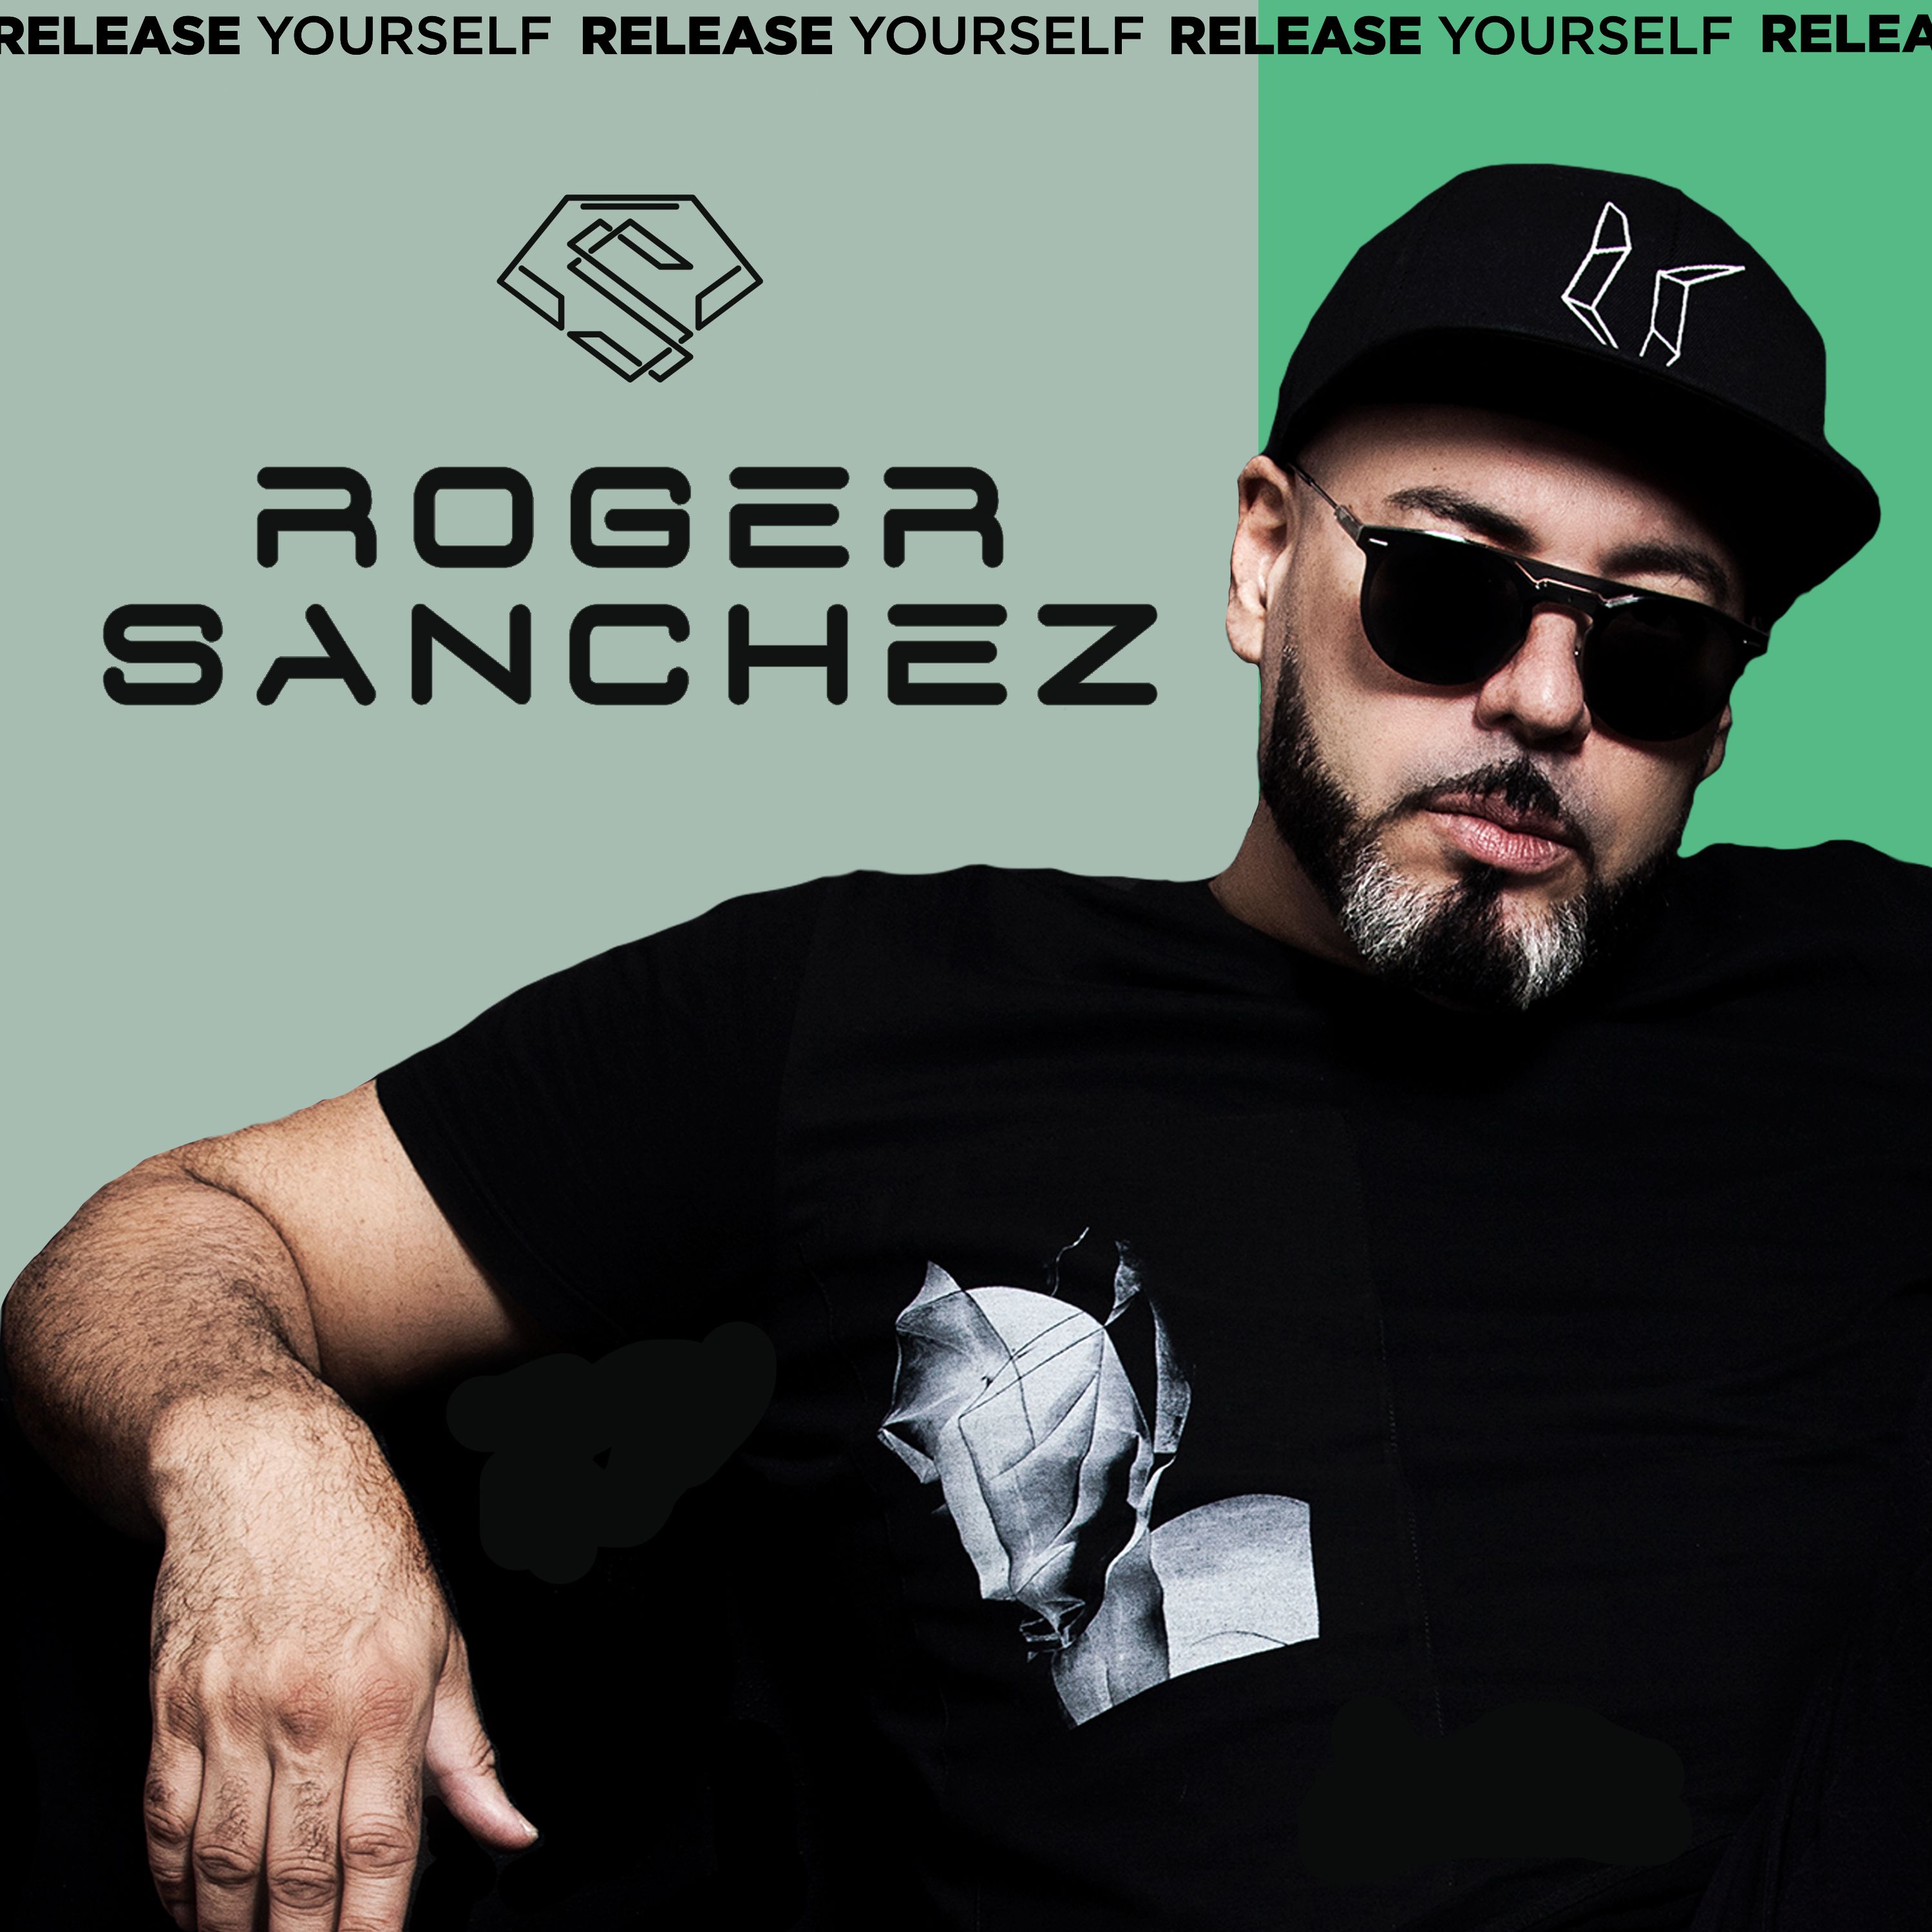 Release Yourself Radio Show #1097 - Roger Sanchez Live In the Mix from Hard Rock Hotel, Tenerife